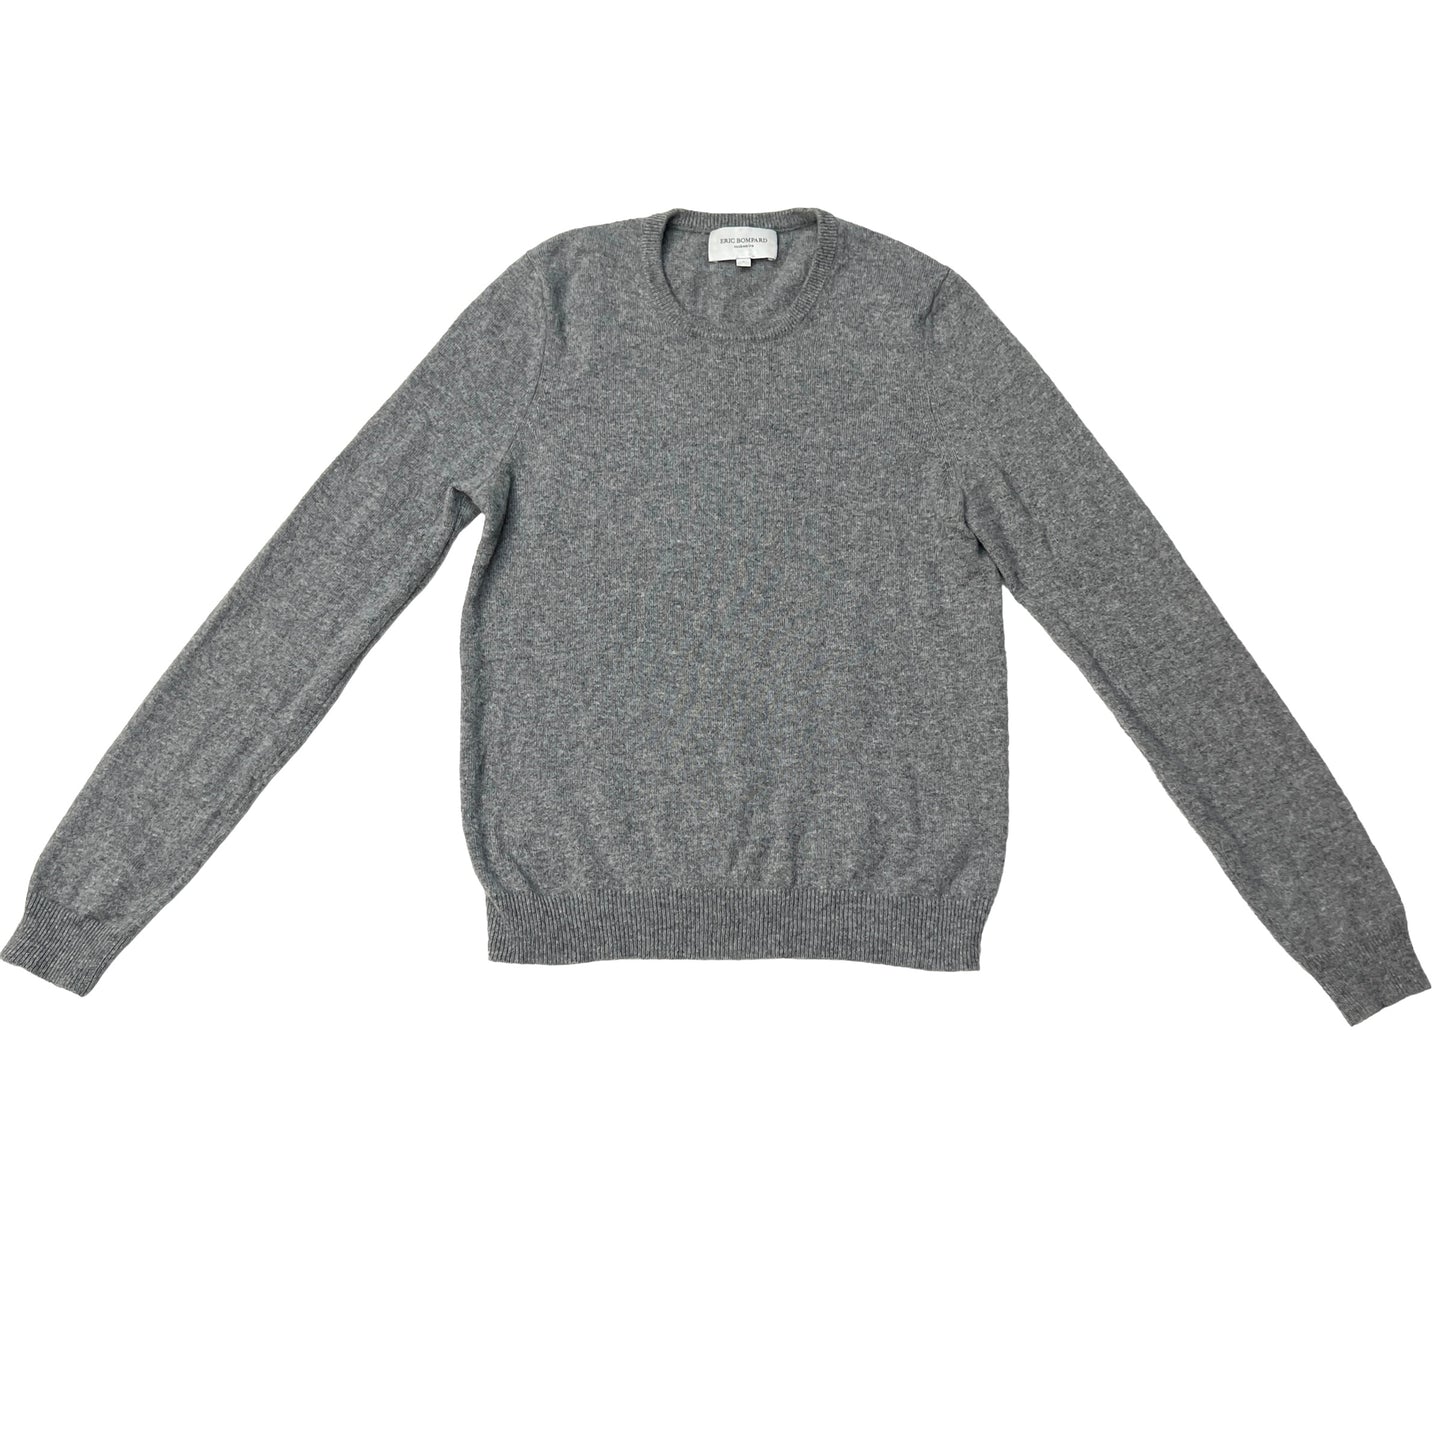 Grey Cashmere Sweater - S